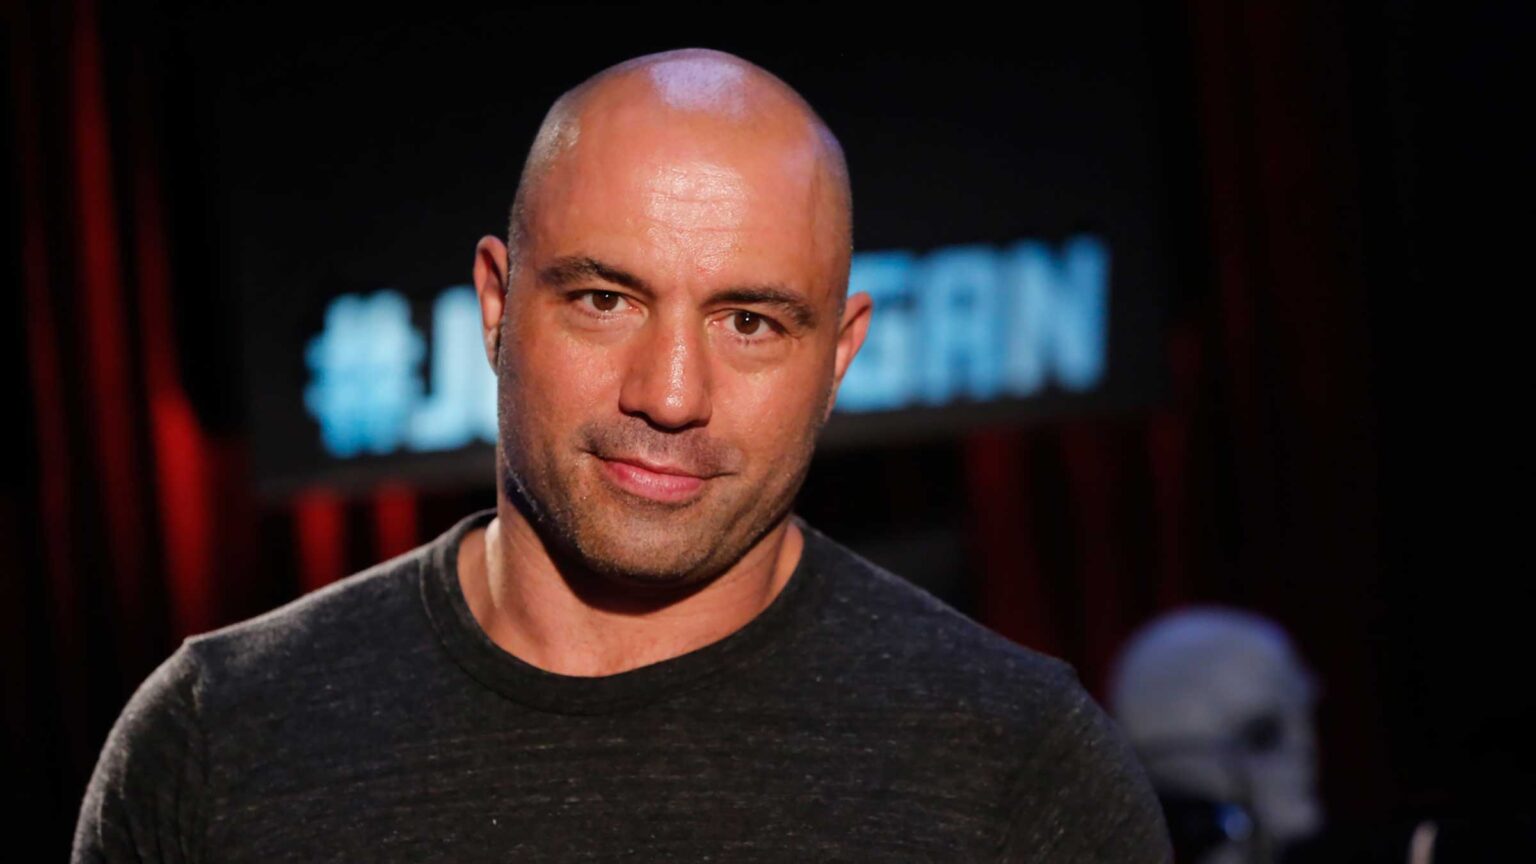 Joe Rogan is not one to shy away from saying whatever the hell he wants. Here are all the times he has been terrible on Twitter.